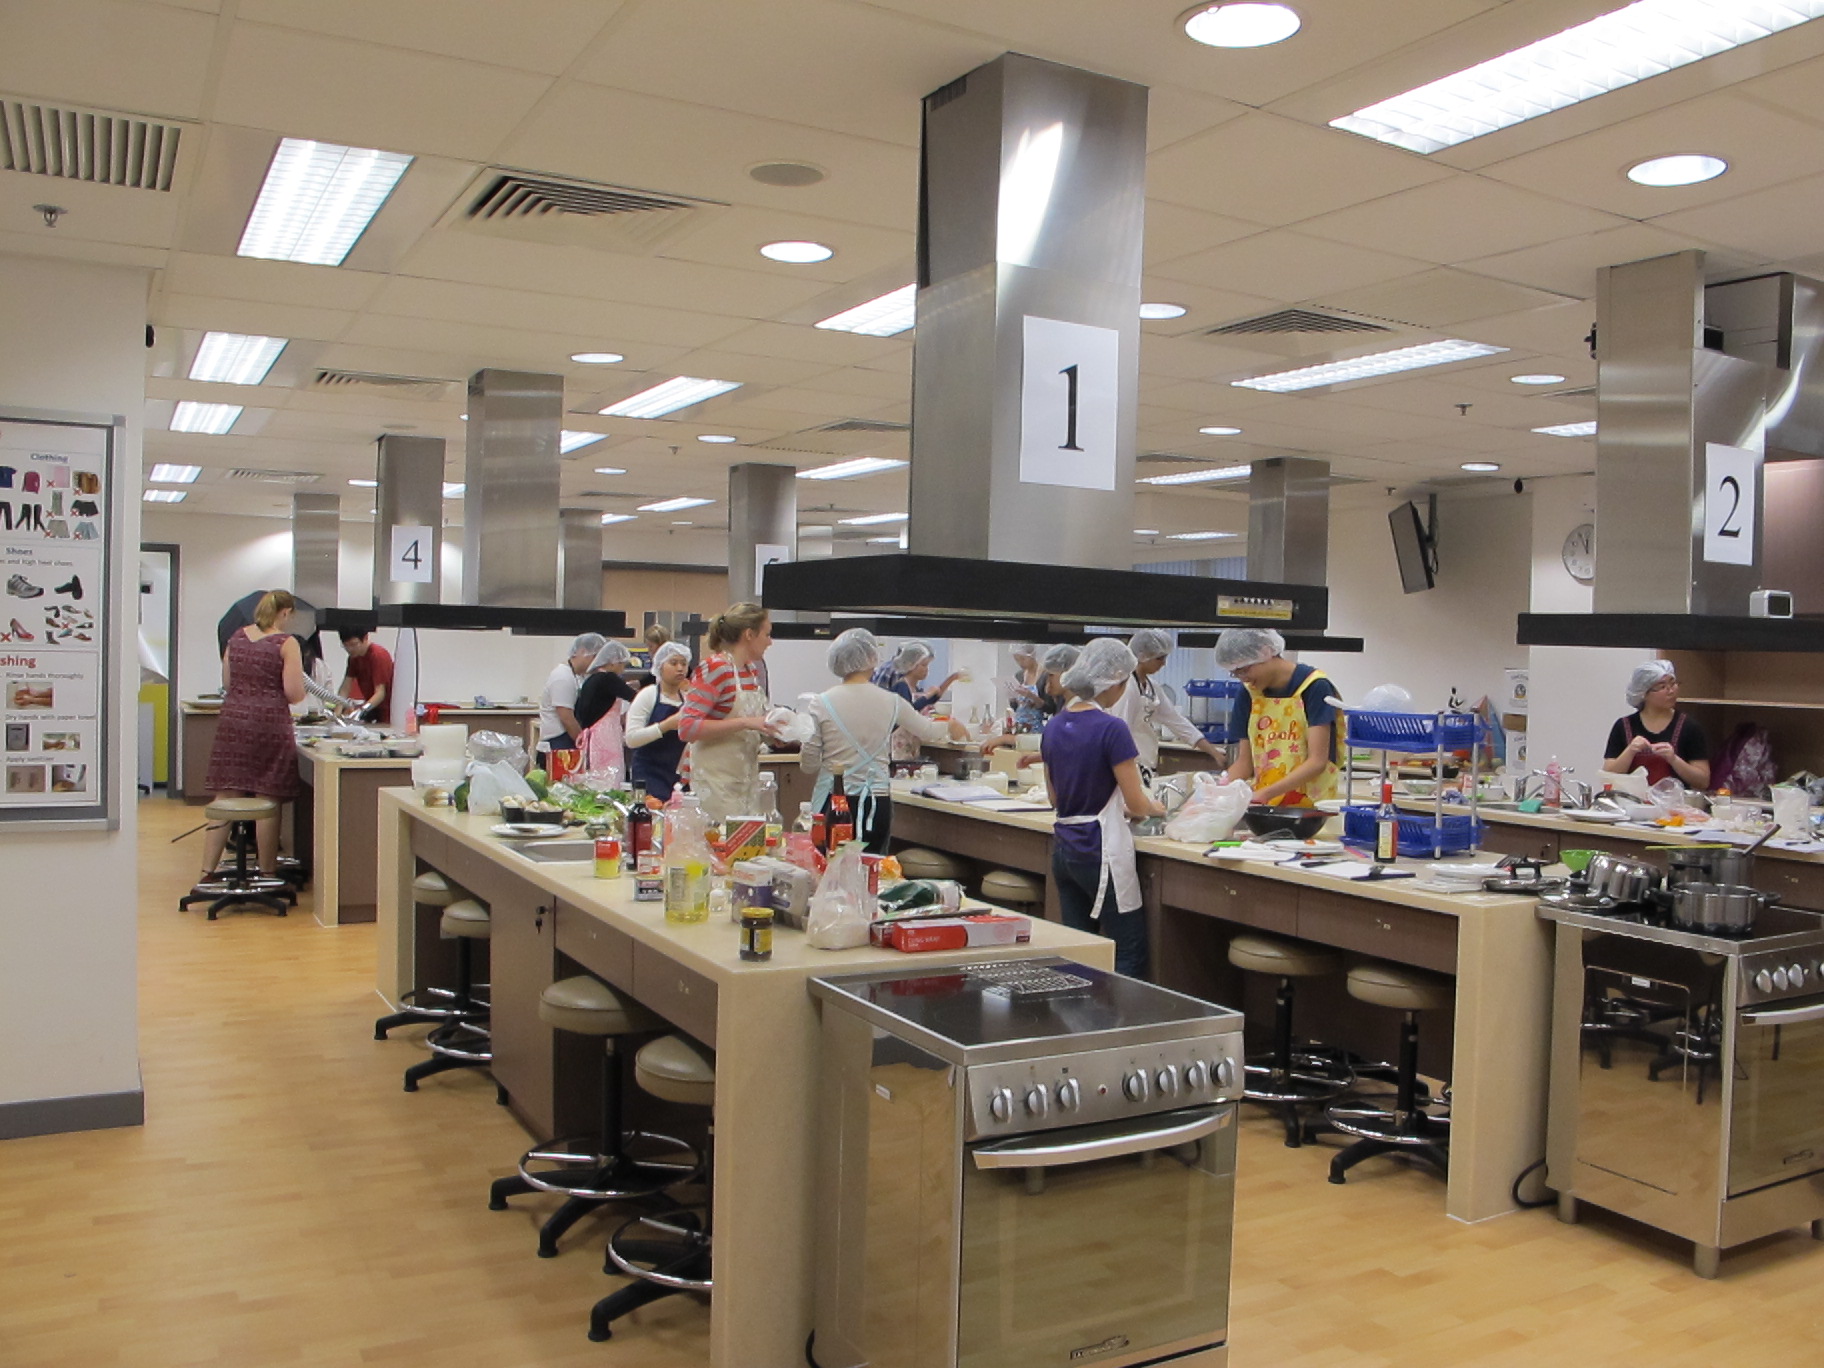 Feeding Hong Kong – Prepare nutritious, simple and low budget cookbook for the needy - Photo - 1